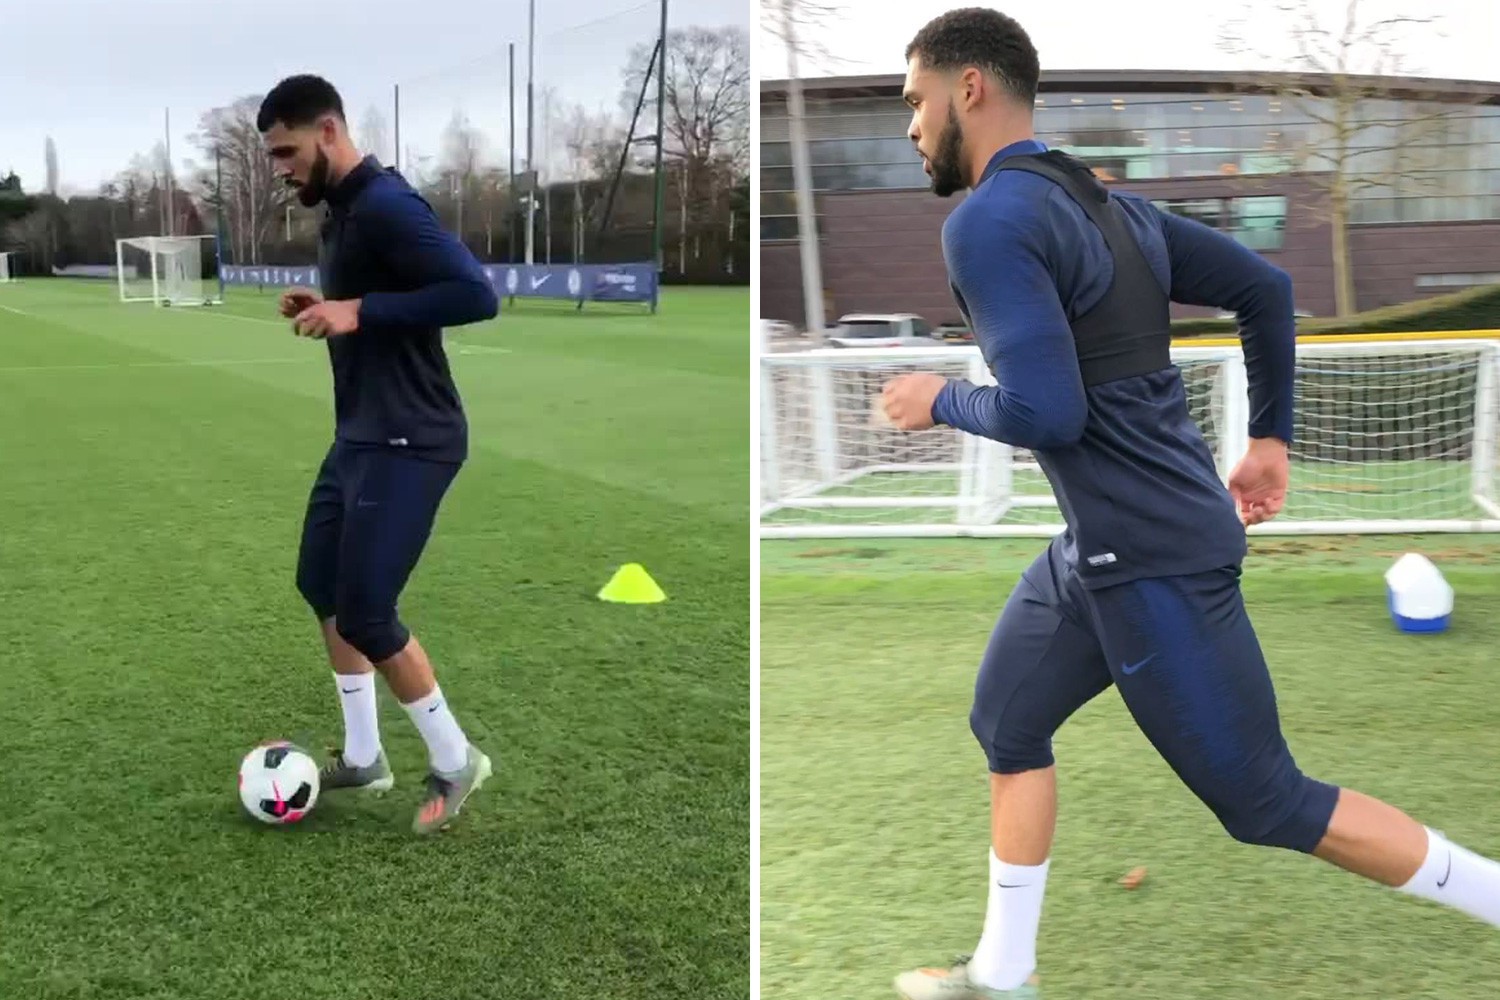 , Loftus-Cheek in welcome Chelsea injury update as he does running and passing drills at Cobham after Achilles setbacks